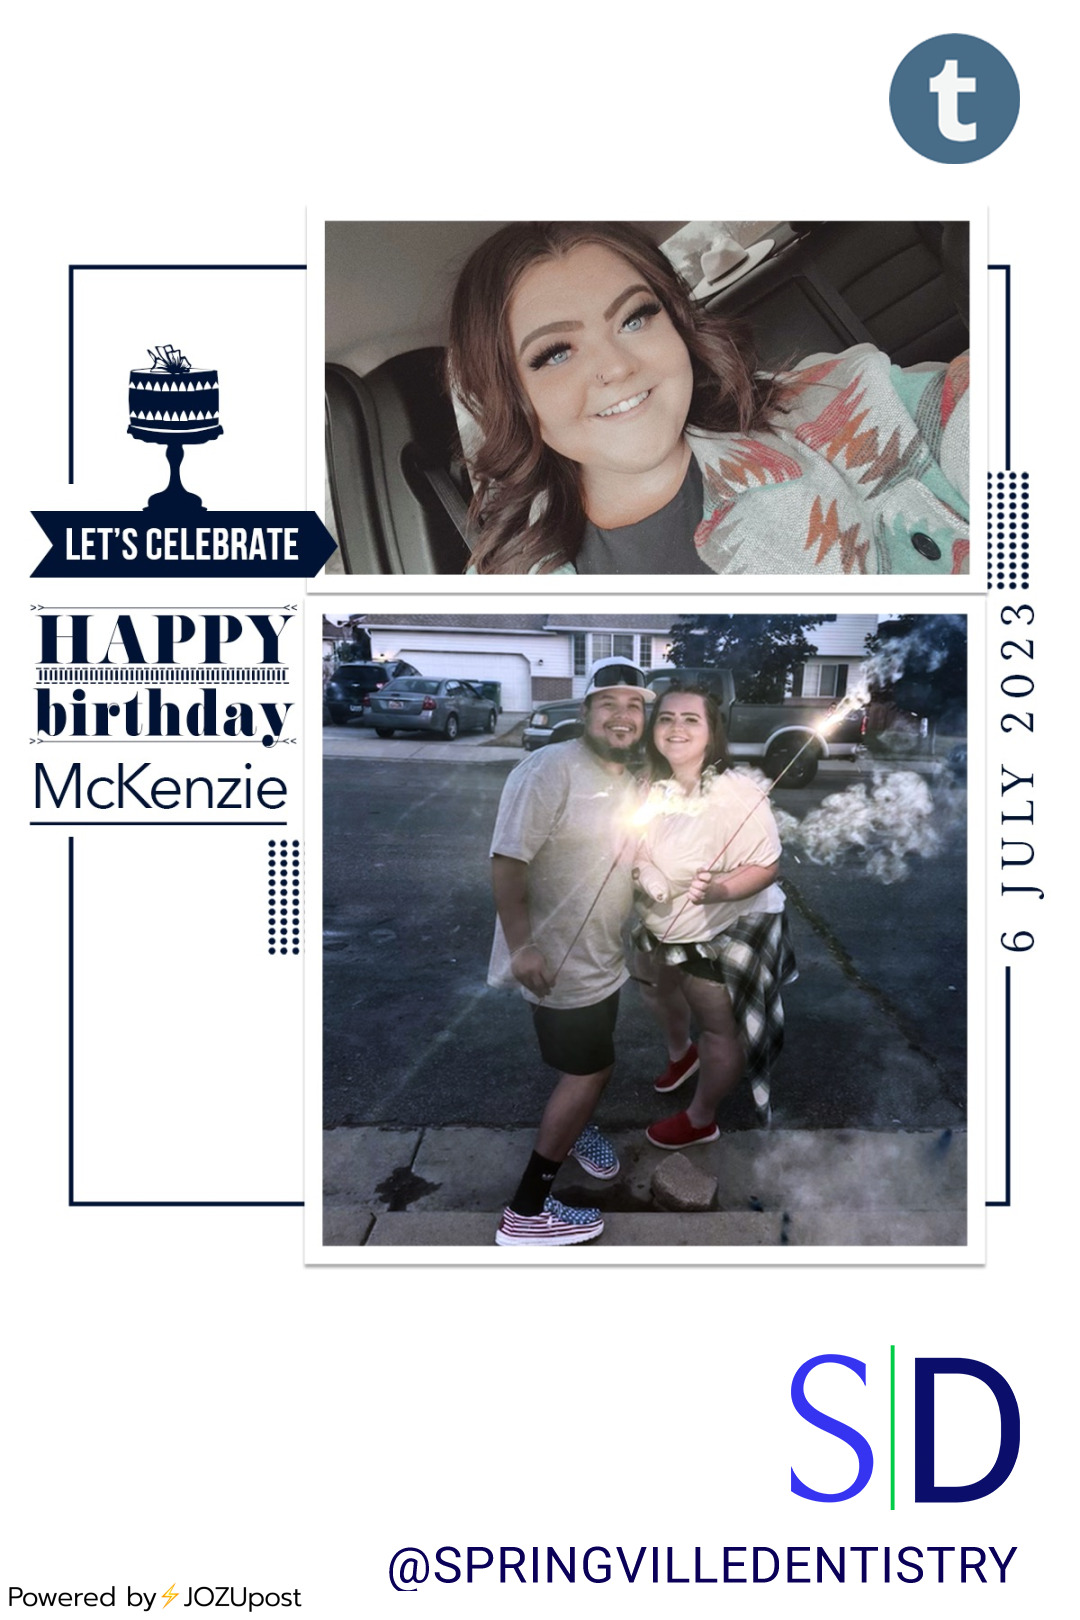 Happy birthday, McKenzie Rogers! McKenzie is one of our newest hires at Springville Dentistry. She’s quickly learning everything she needs to know to assist our patients. We’re excited to have her! Check out this cute pictures of her and her...